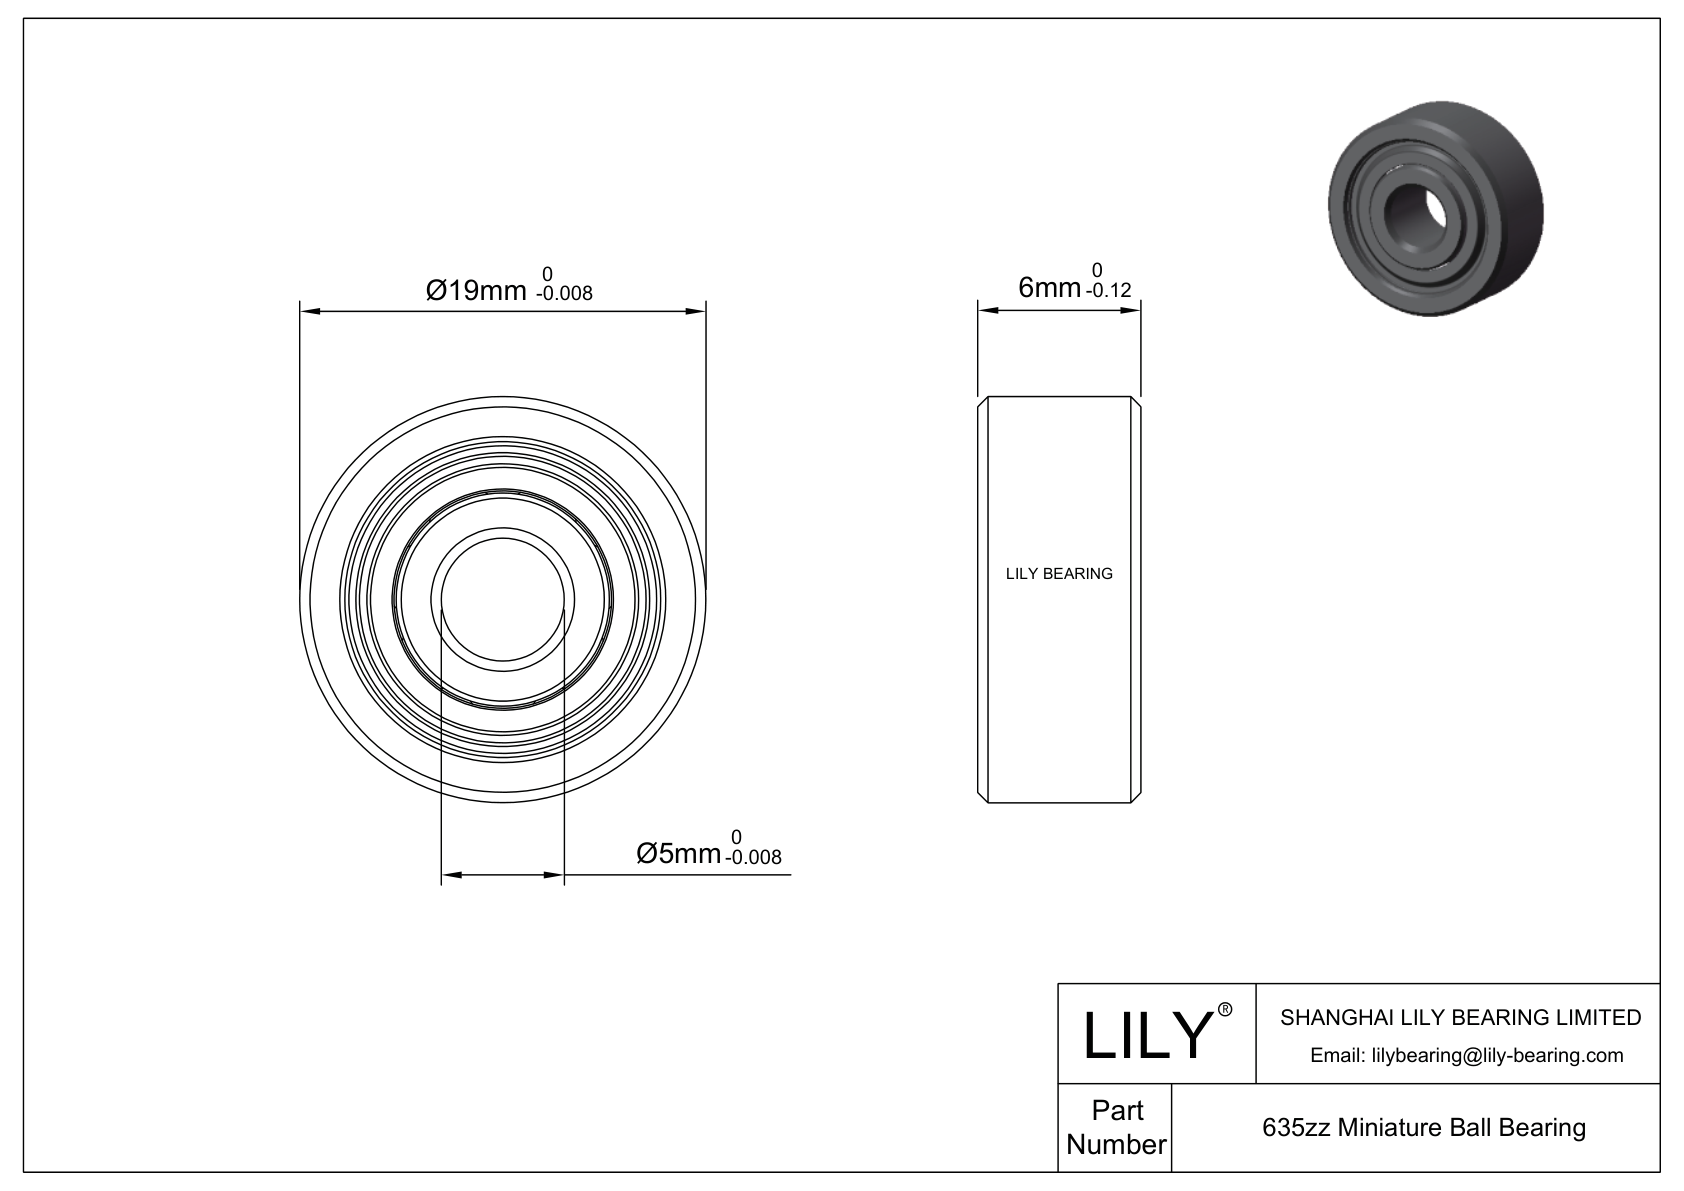 LILY-BST63530-20 Outsourcing POM bearings cad drawing